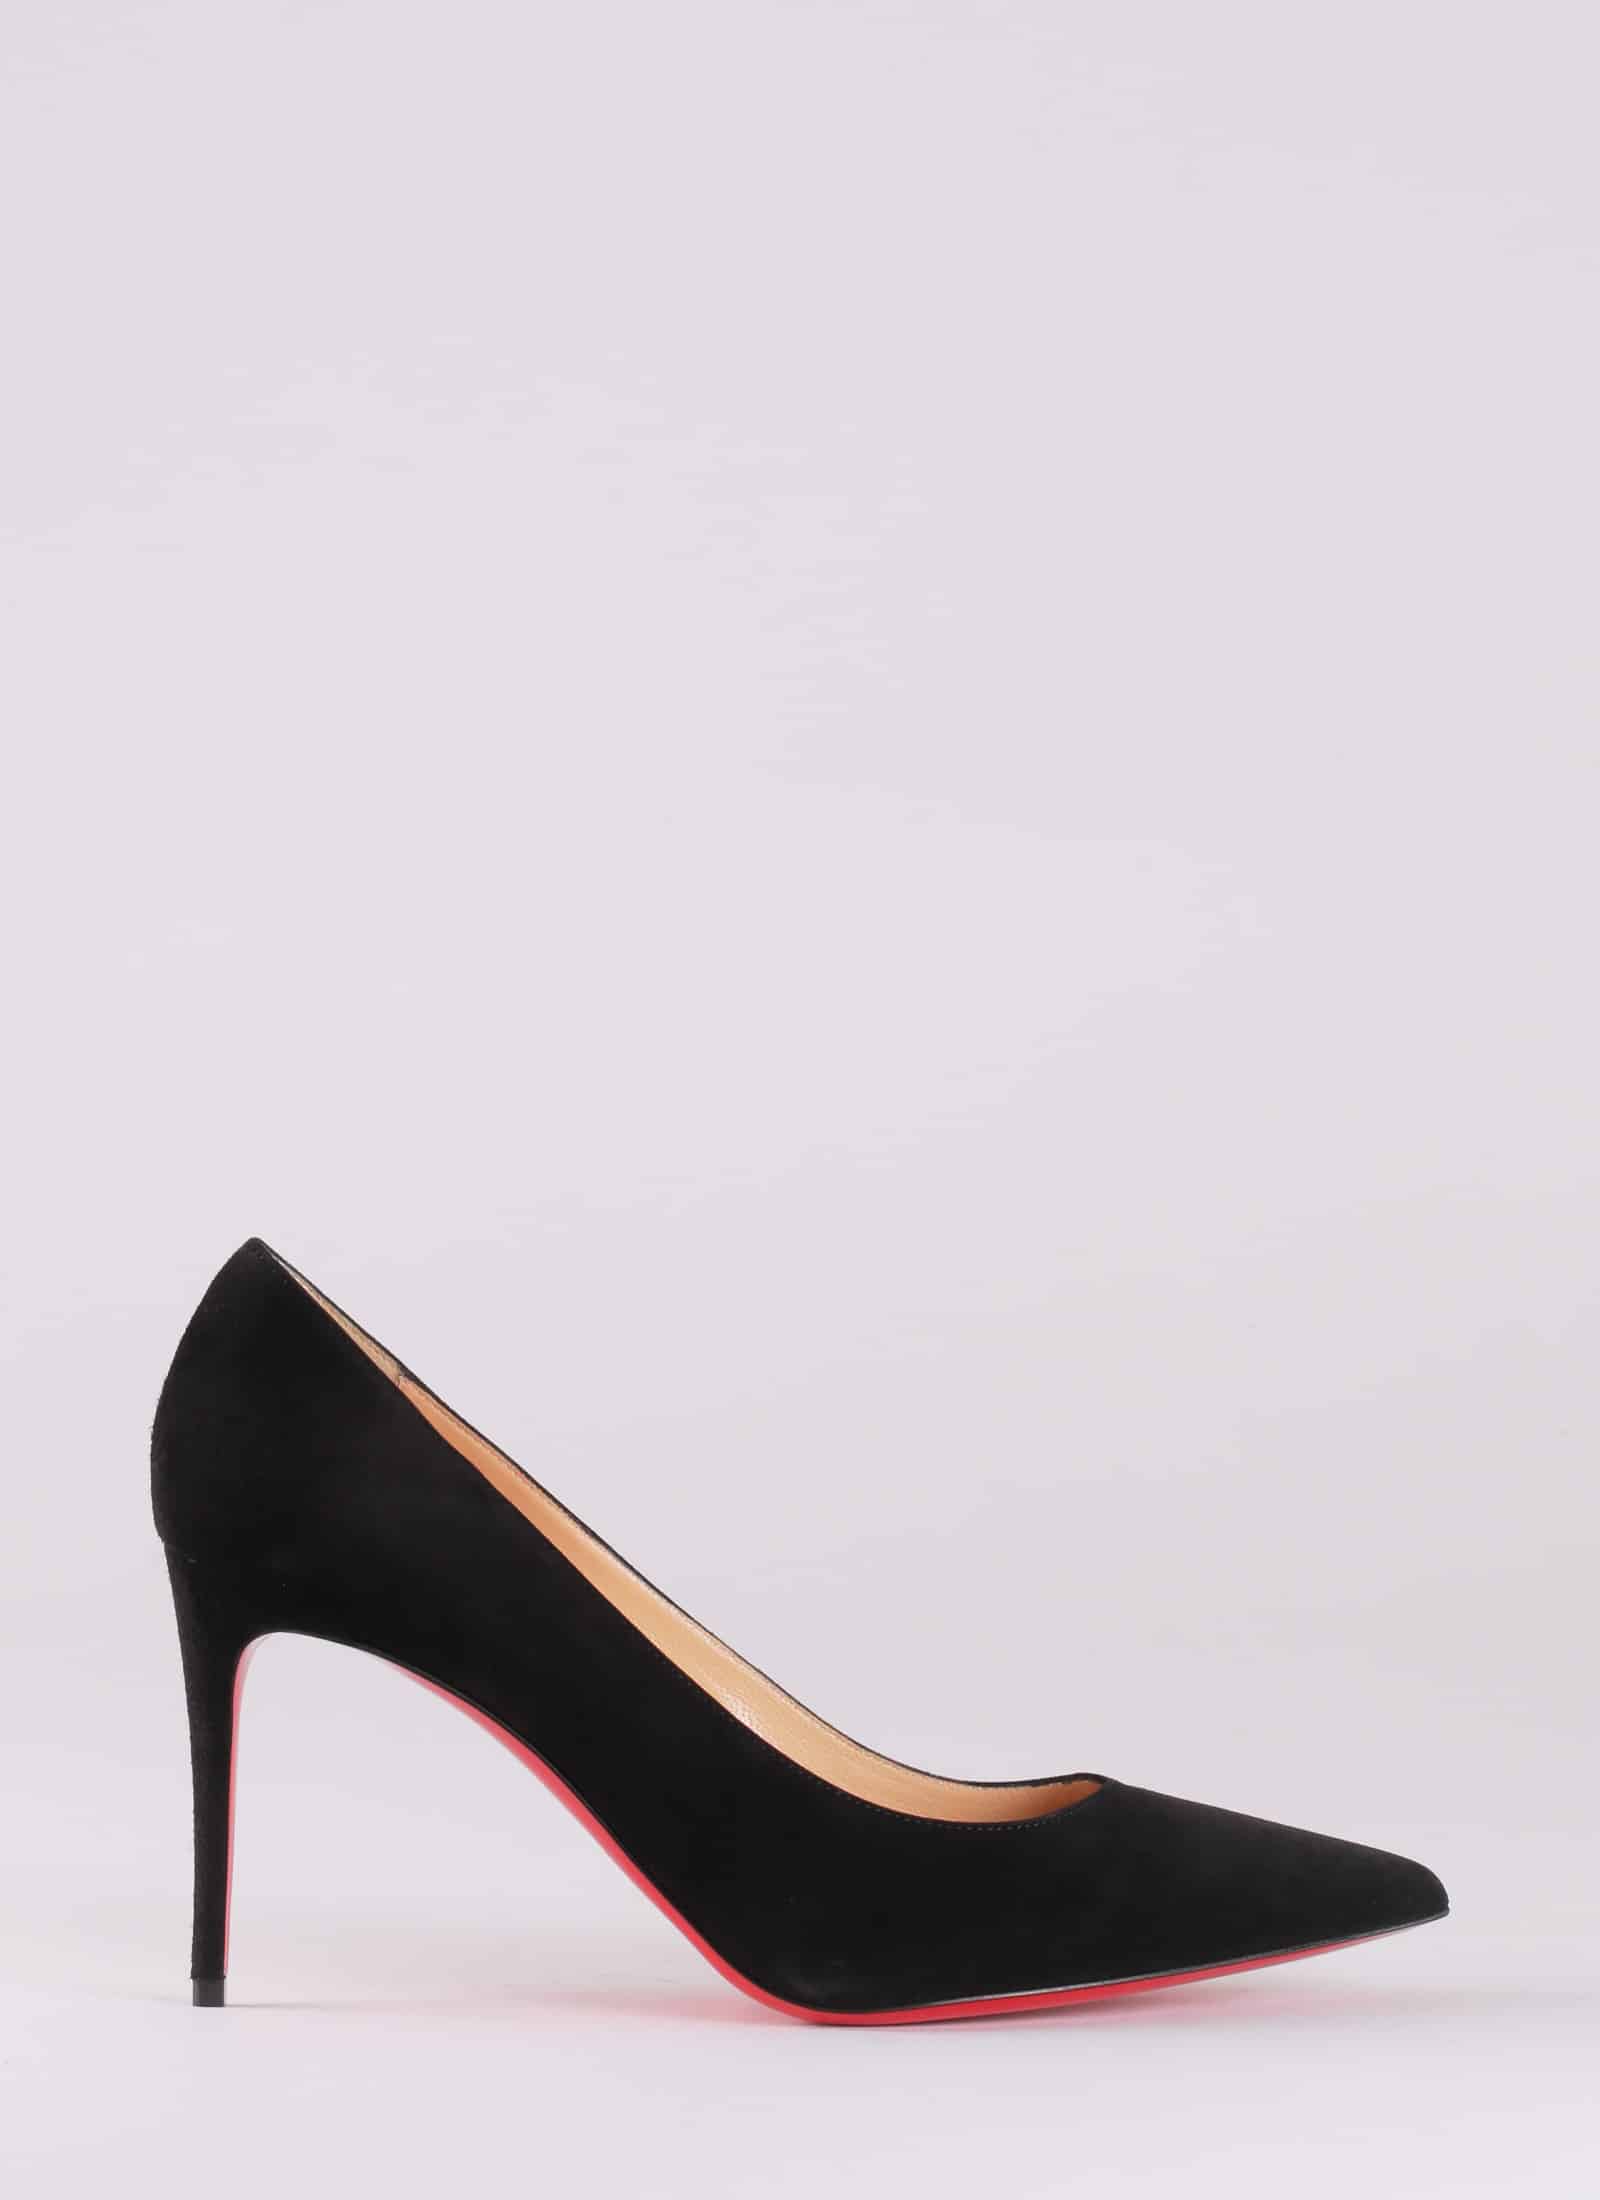 KATE SUEDE SHOES - CHRISTIAN LOUBOUTIN